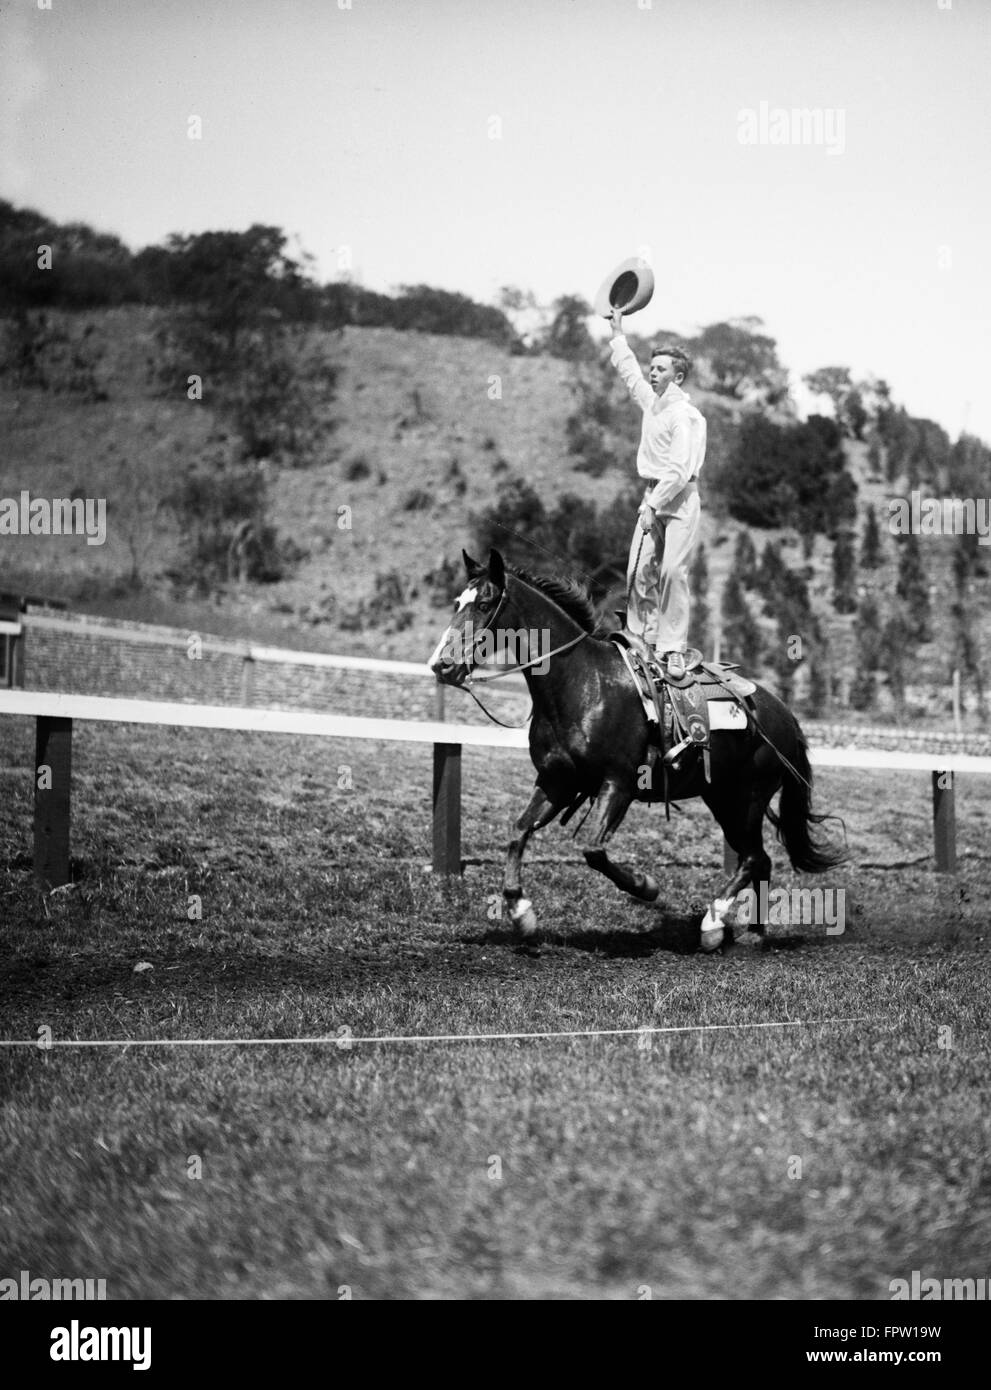 1930s JIM ROGERS SON OF ACTOR WILL ROGERS PERFORMING STUNT TRICK STANDING ON GALLOPING HORSE BACK WAVING COWBOY HAT Stock Photo